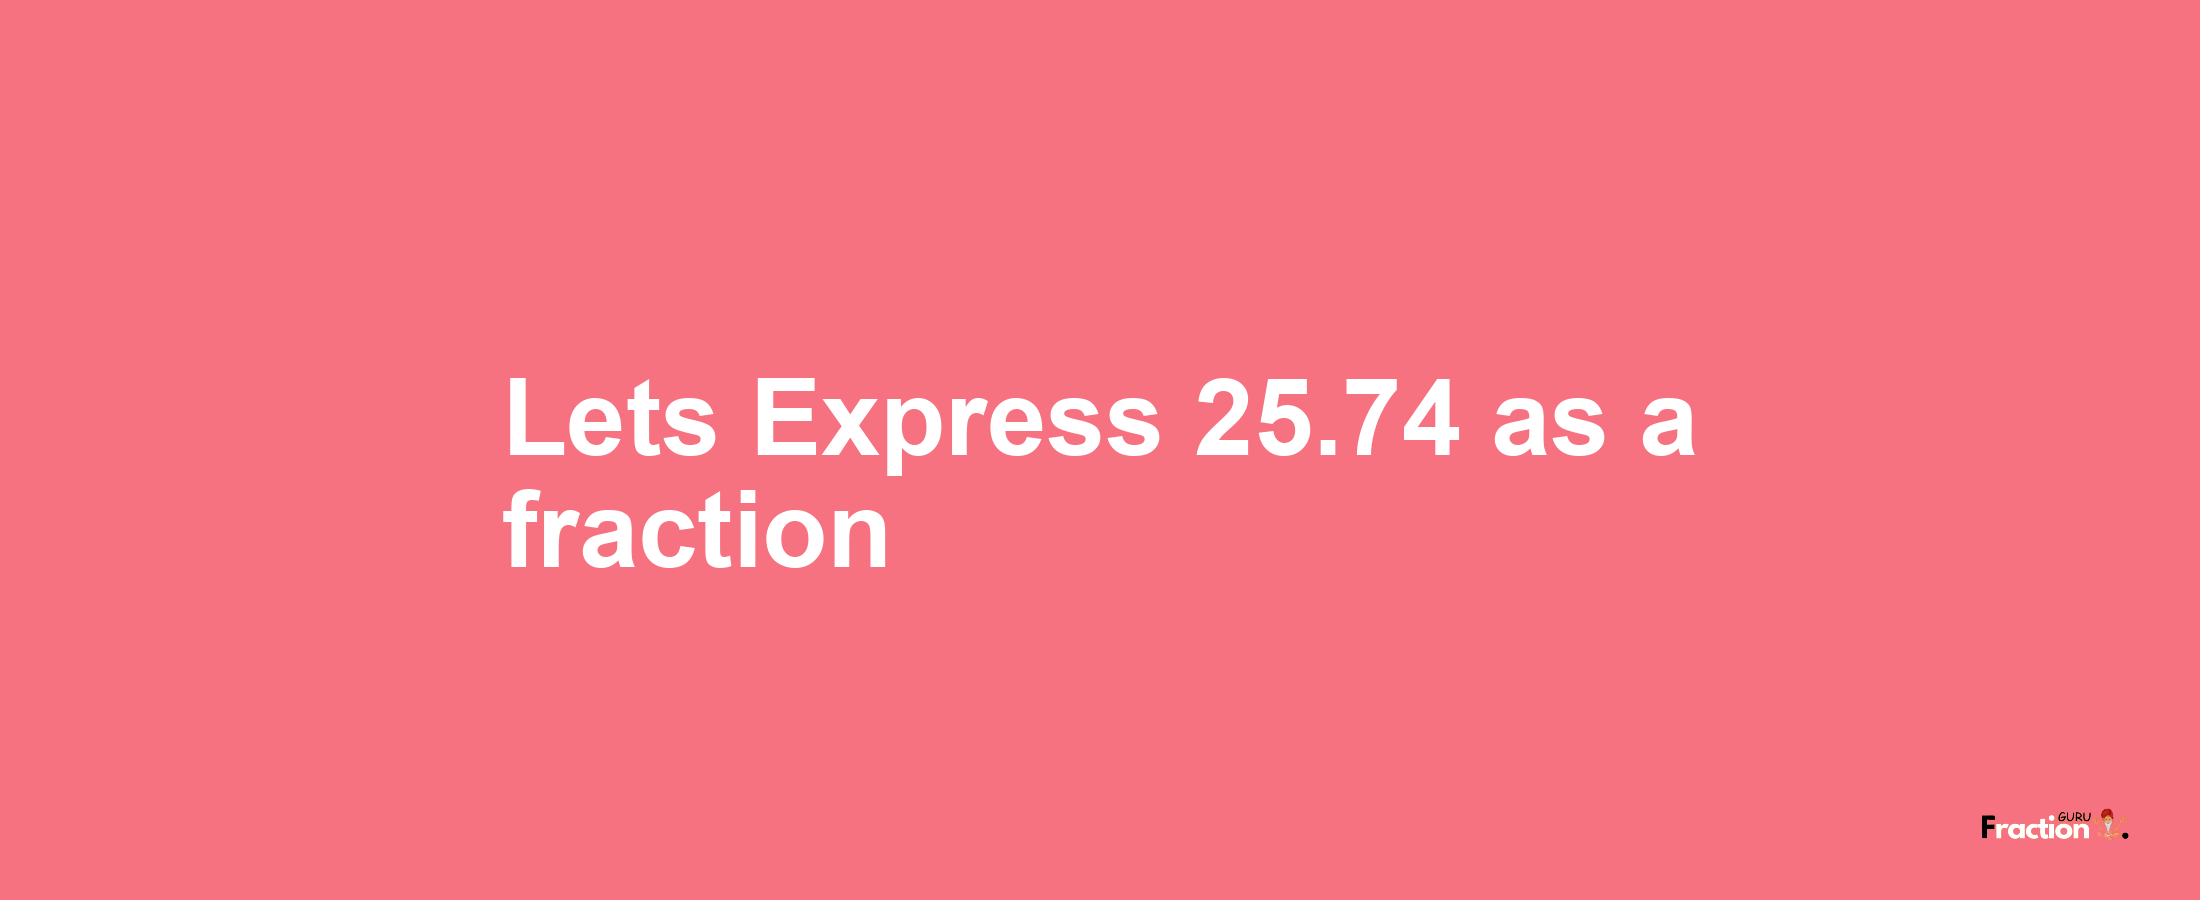 Lets Express 25.74 as afraction